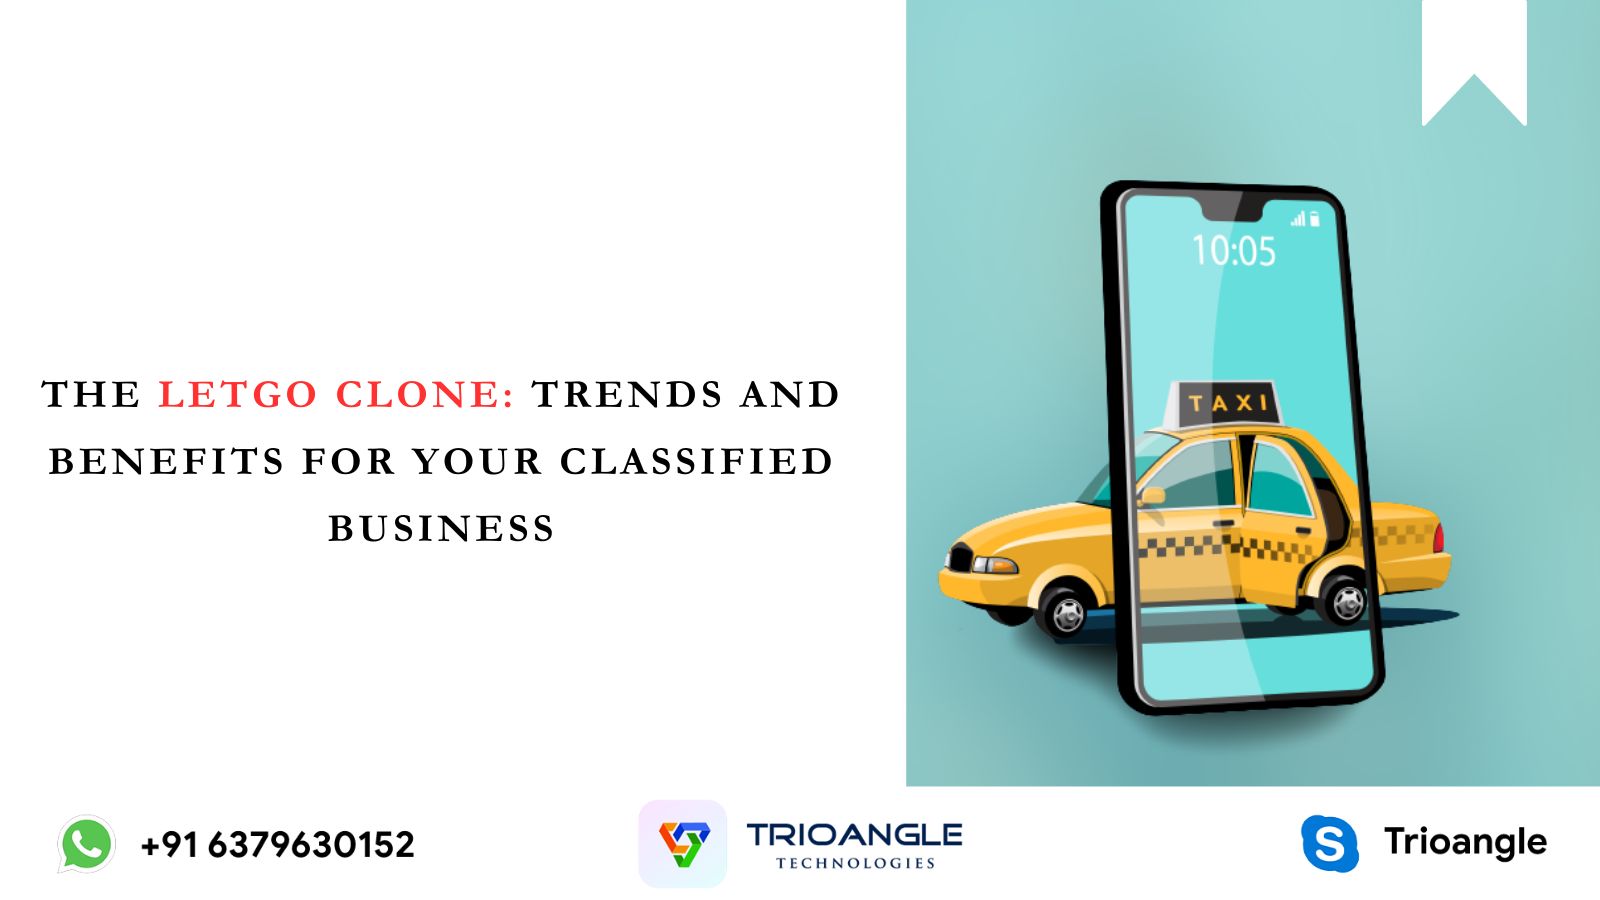 The Letgo Clone Trends And Benefits For Your Classified Business